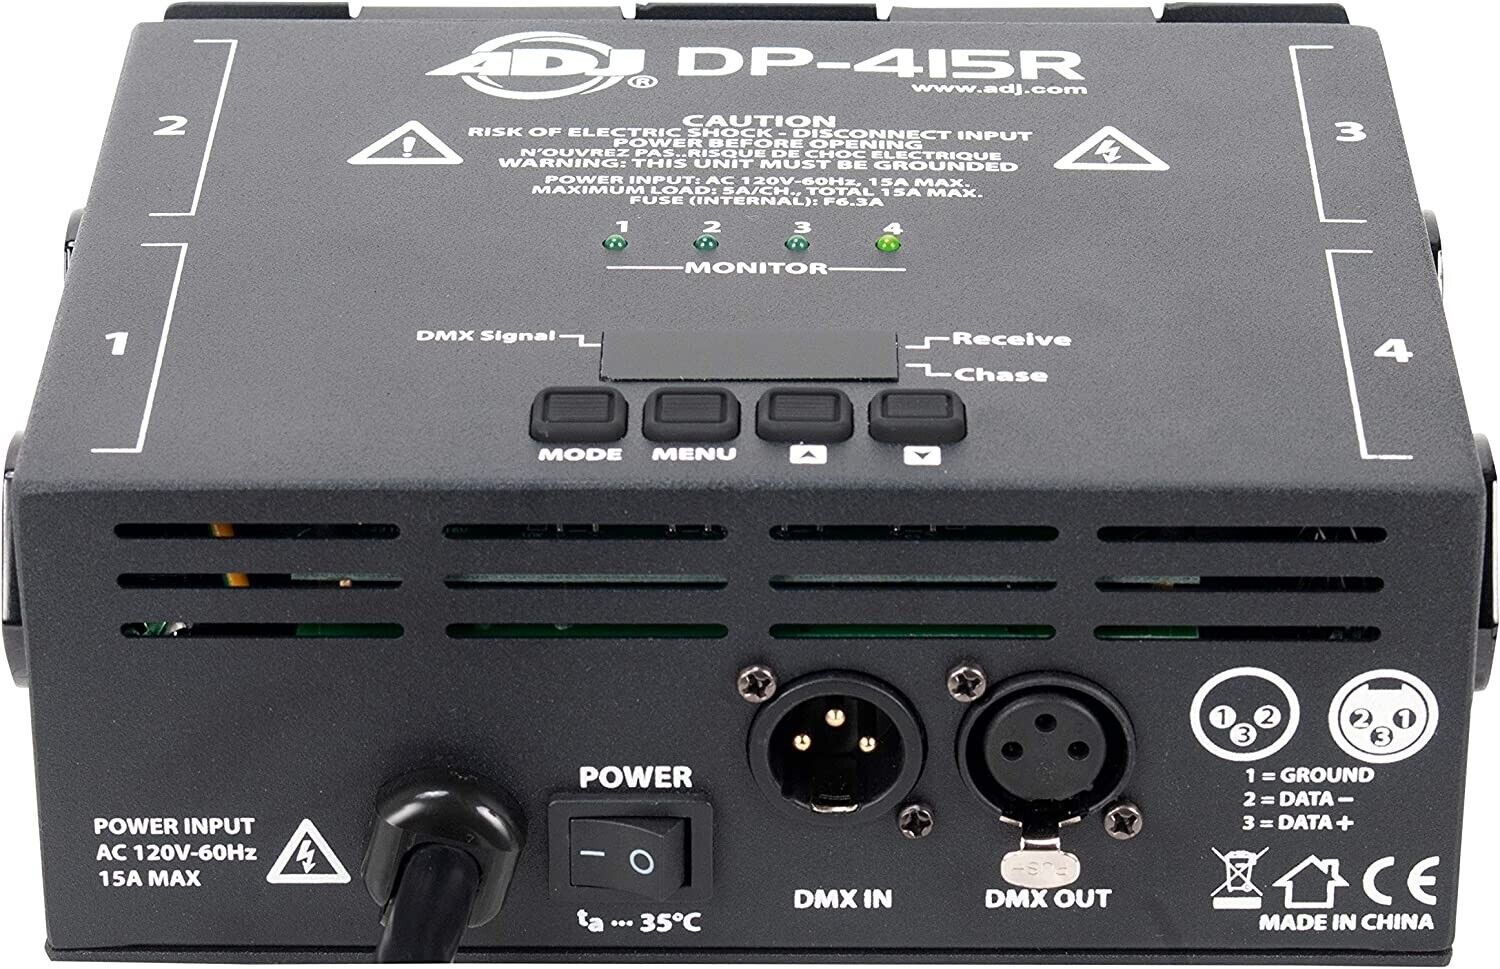 Adj Products Dp-415r 4 Channel Dmx512 Dimmer Pack New, Open Box